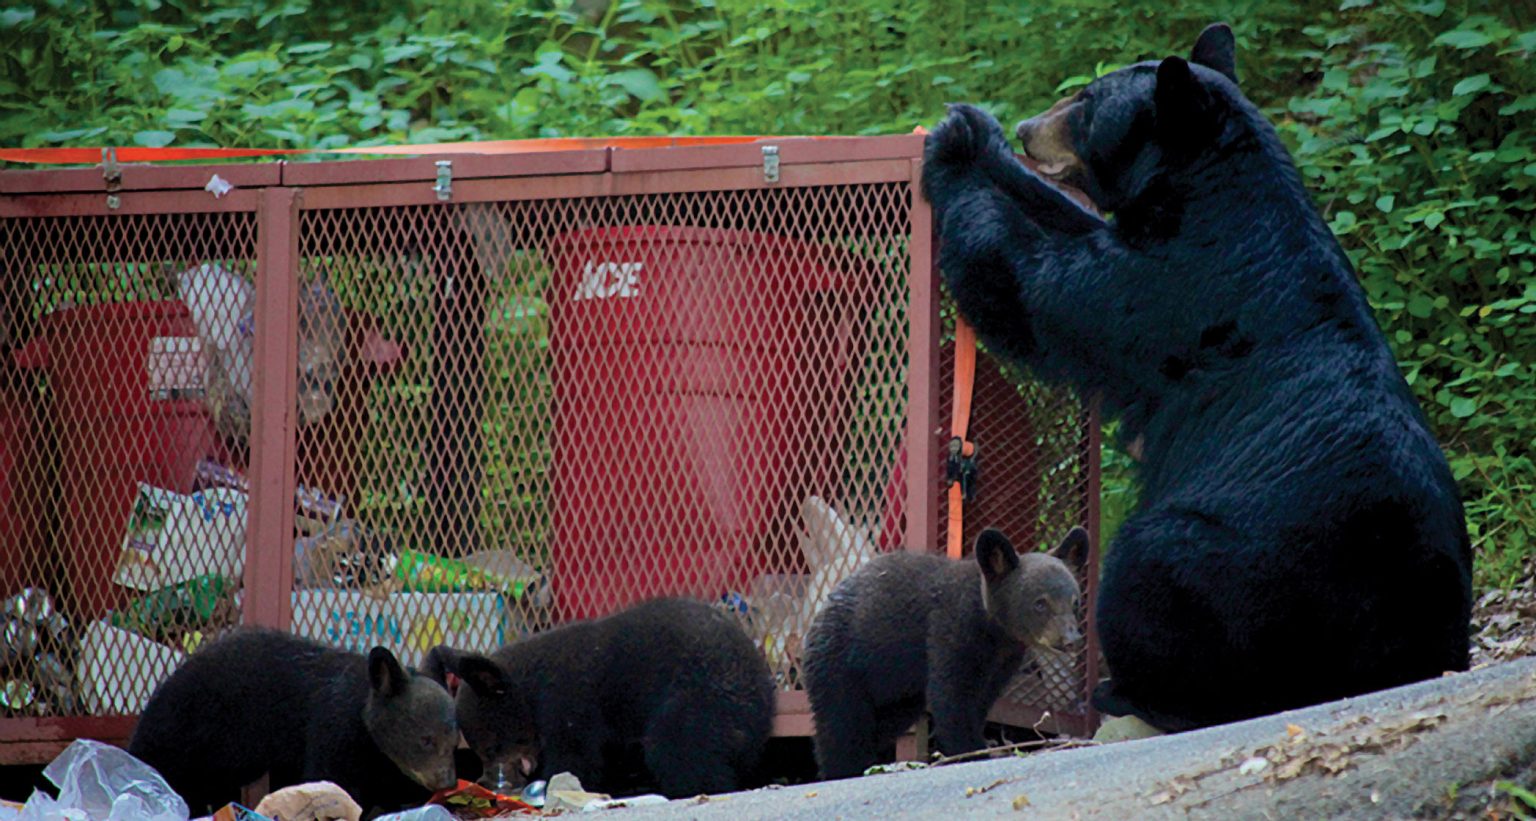 When bears learn to rely on unsecured garbage for food, they can become aggressive and dangerous, creating a risky situation for both bears and humans. Photo provided by Sarah Robinette.